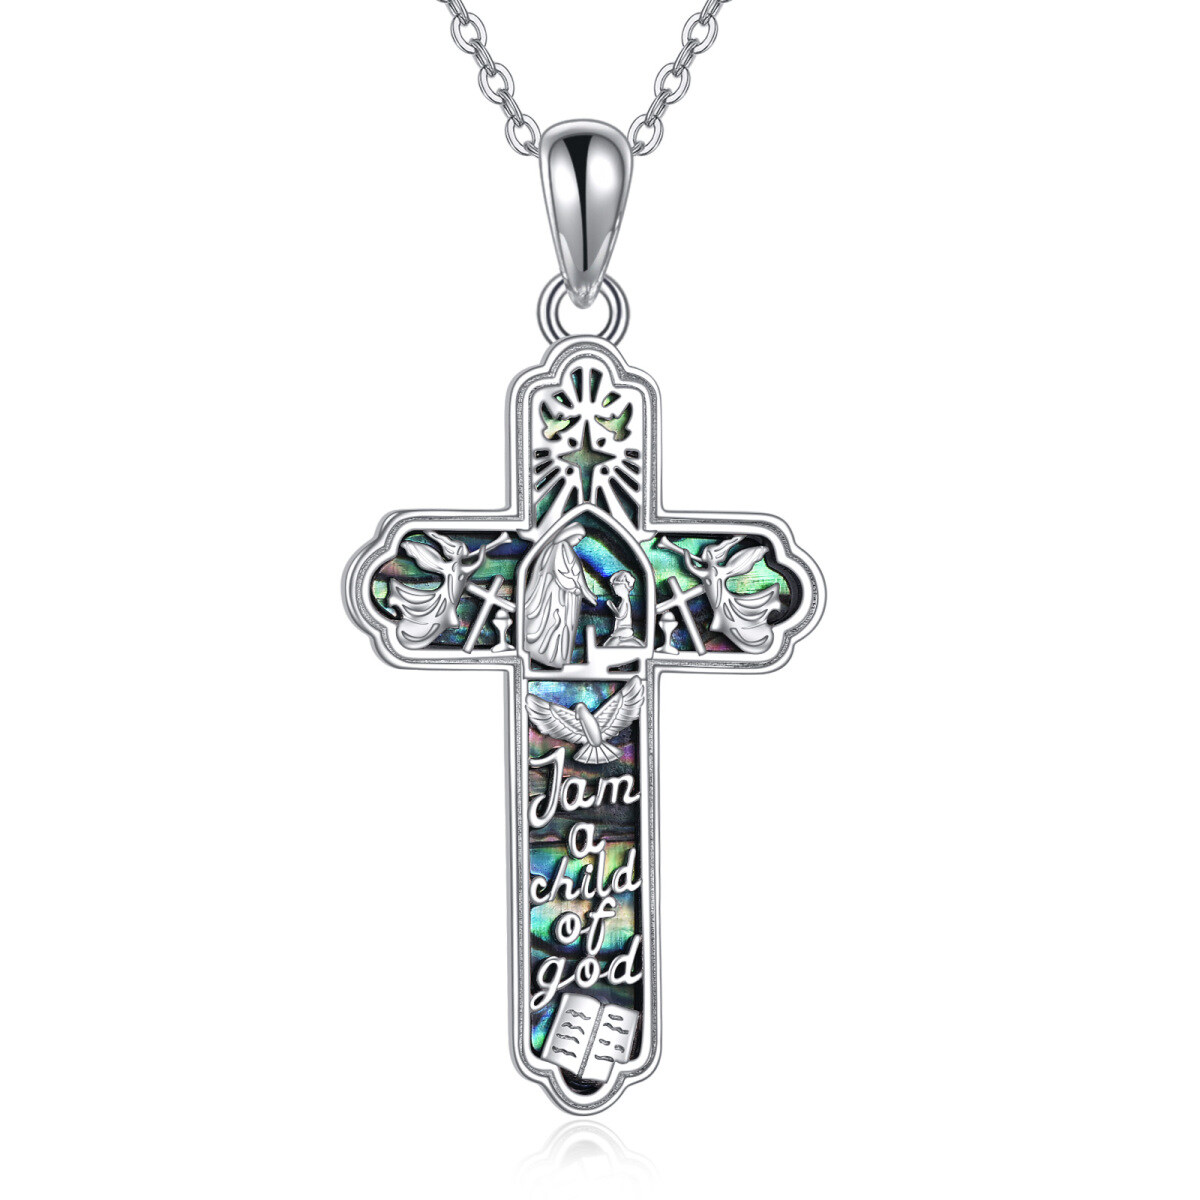 Sterling Silver Abalone Shellfish Cross Pendant Necklace with Engraved Word-1